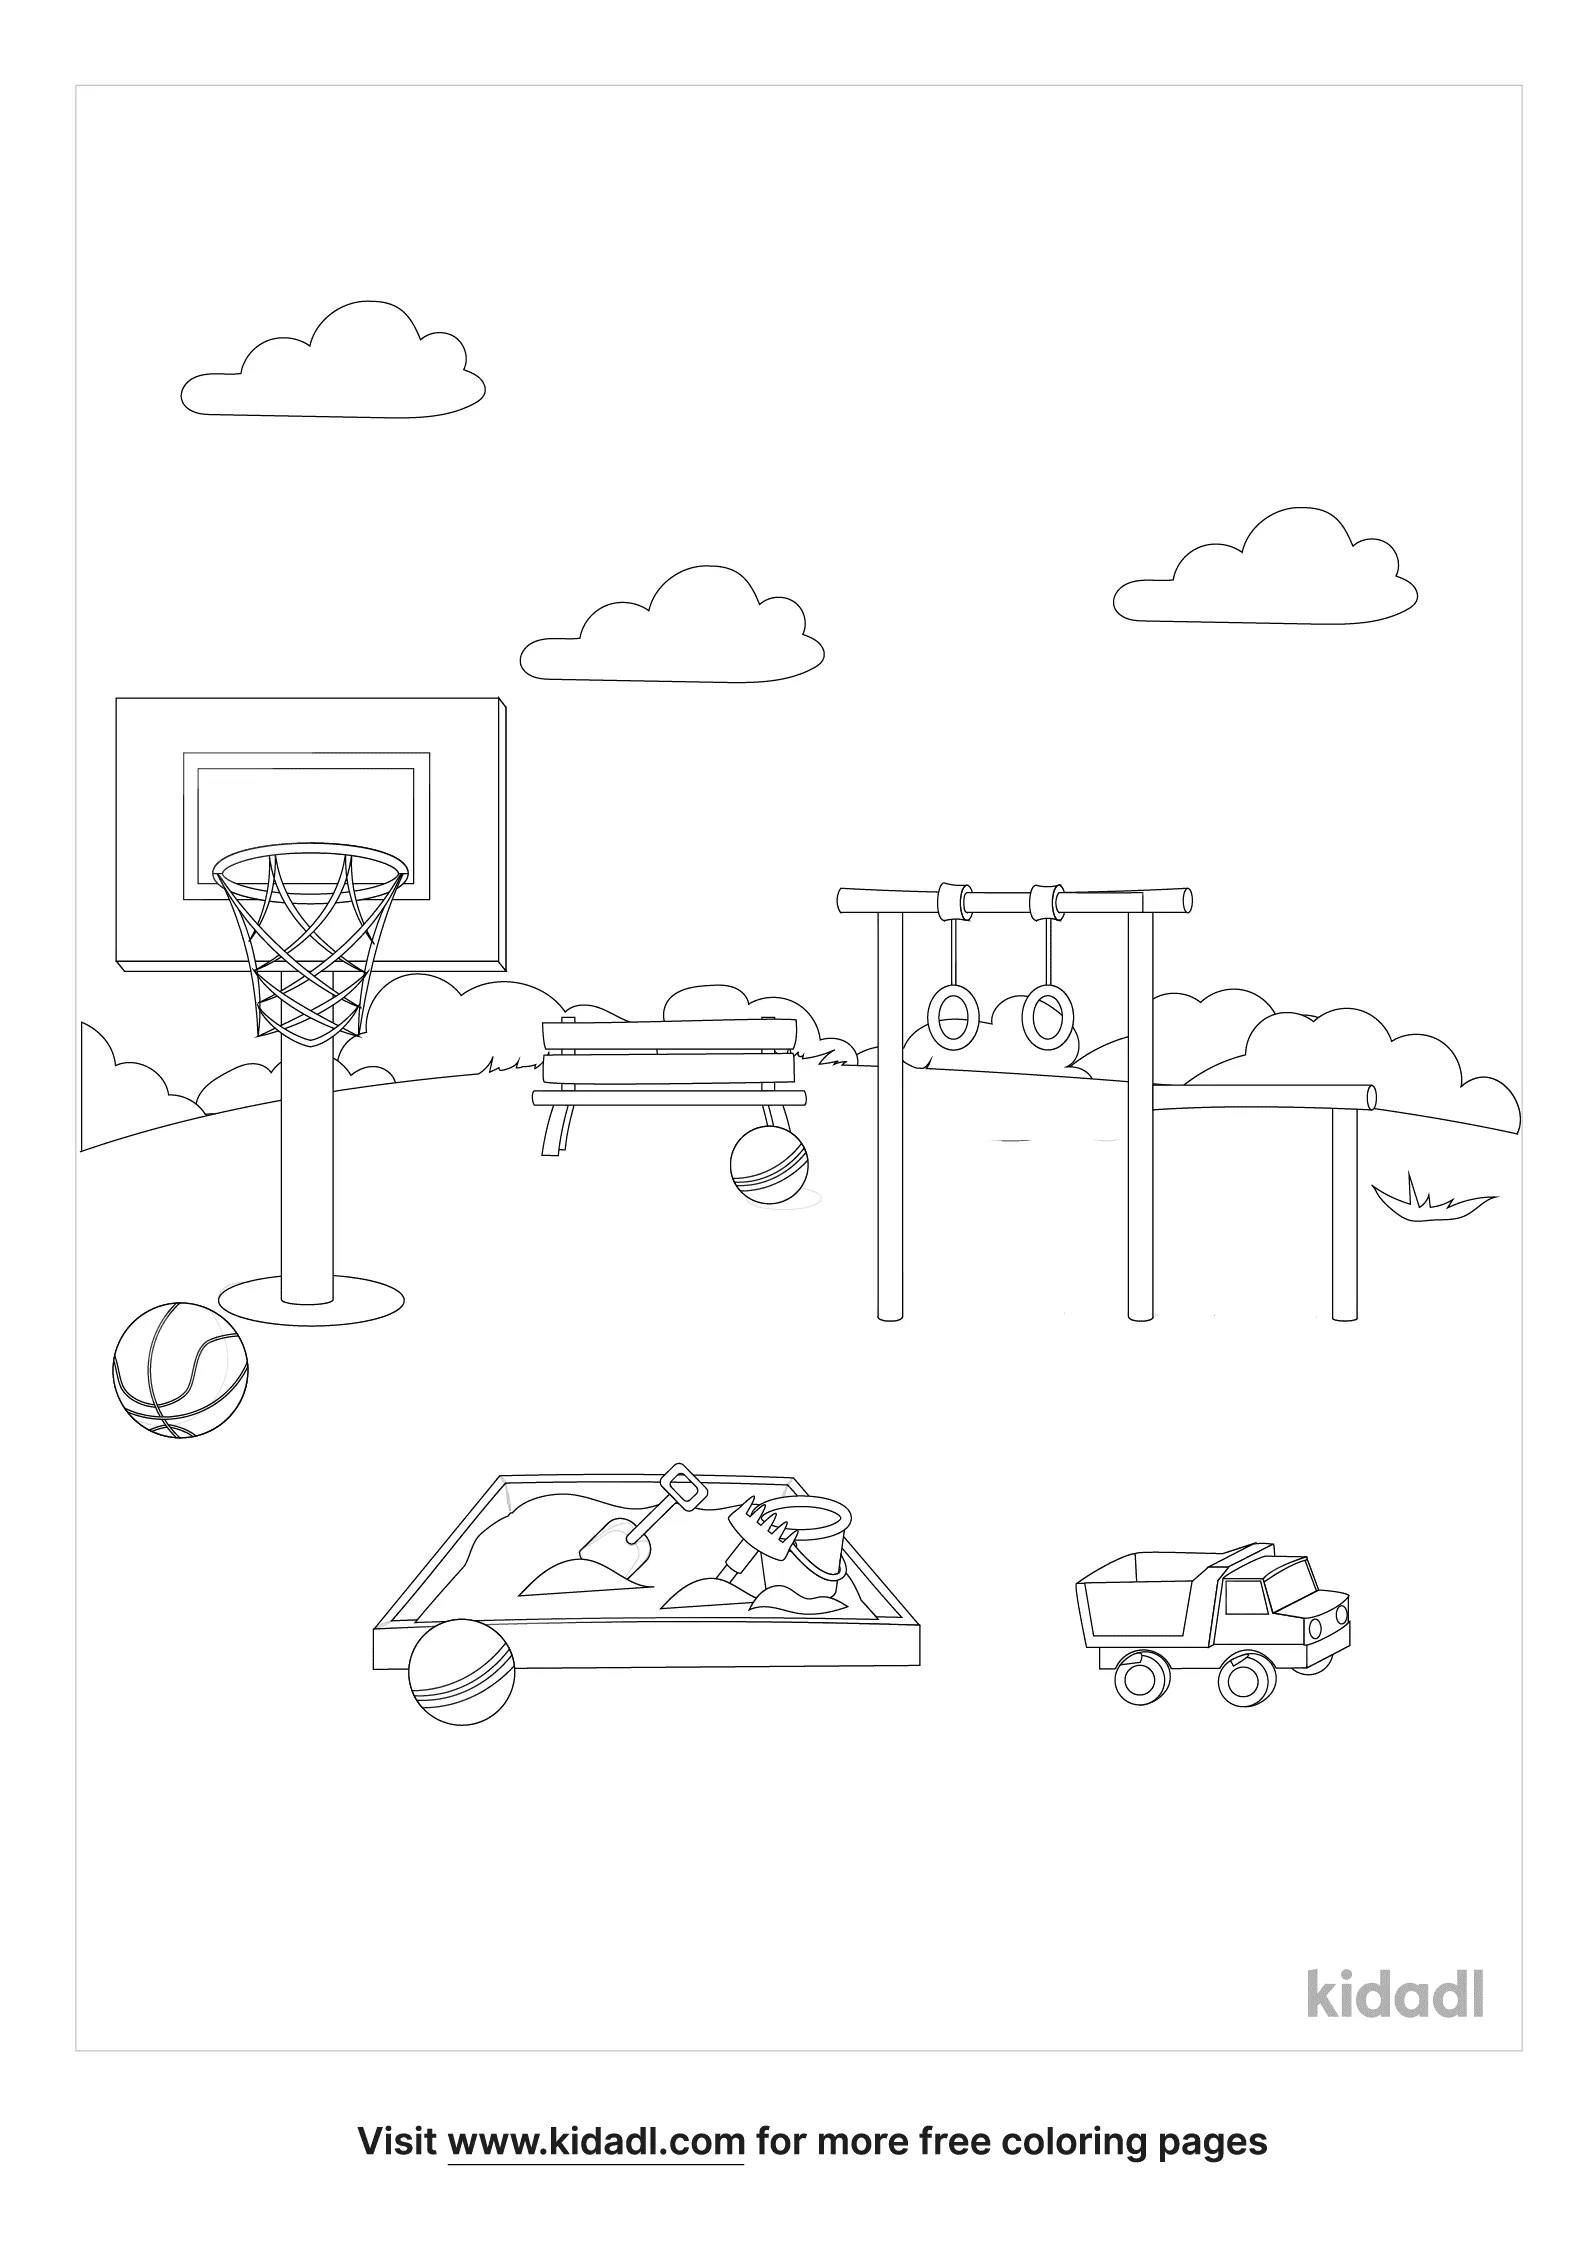 Swing Set Coloring Pages